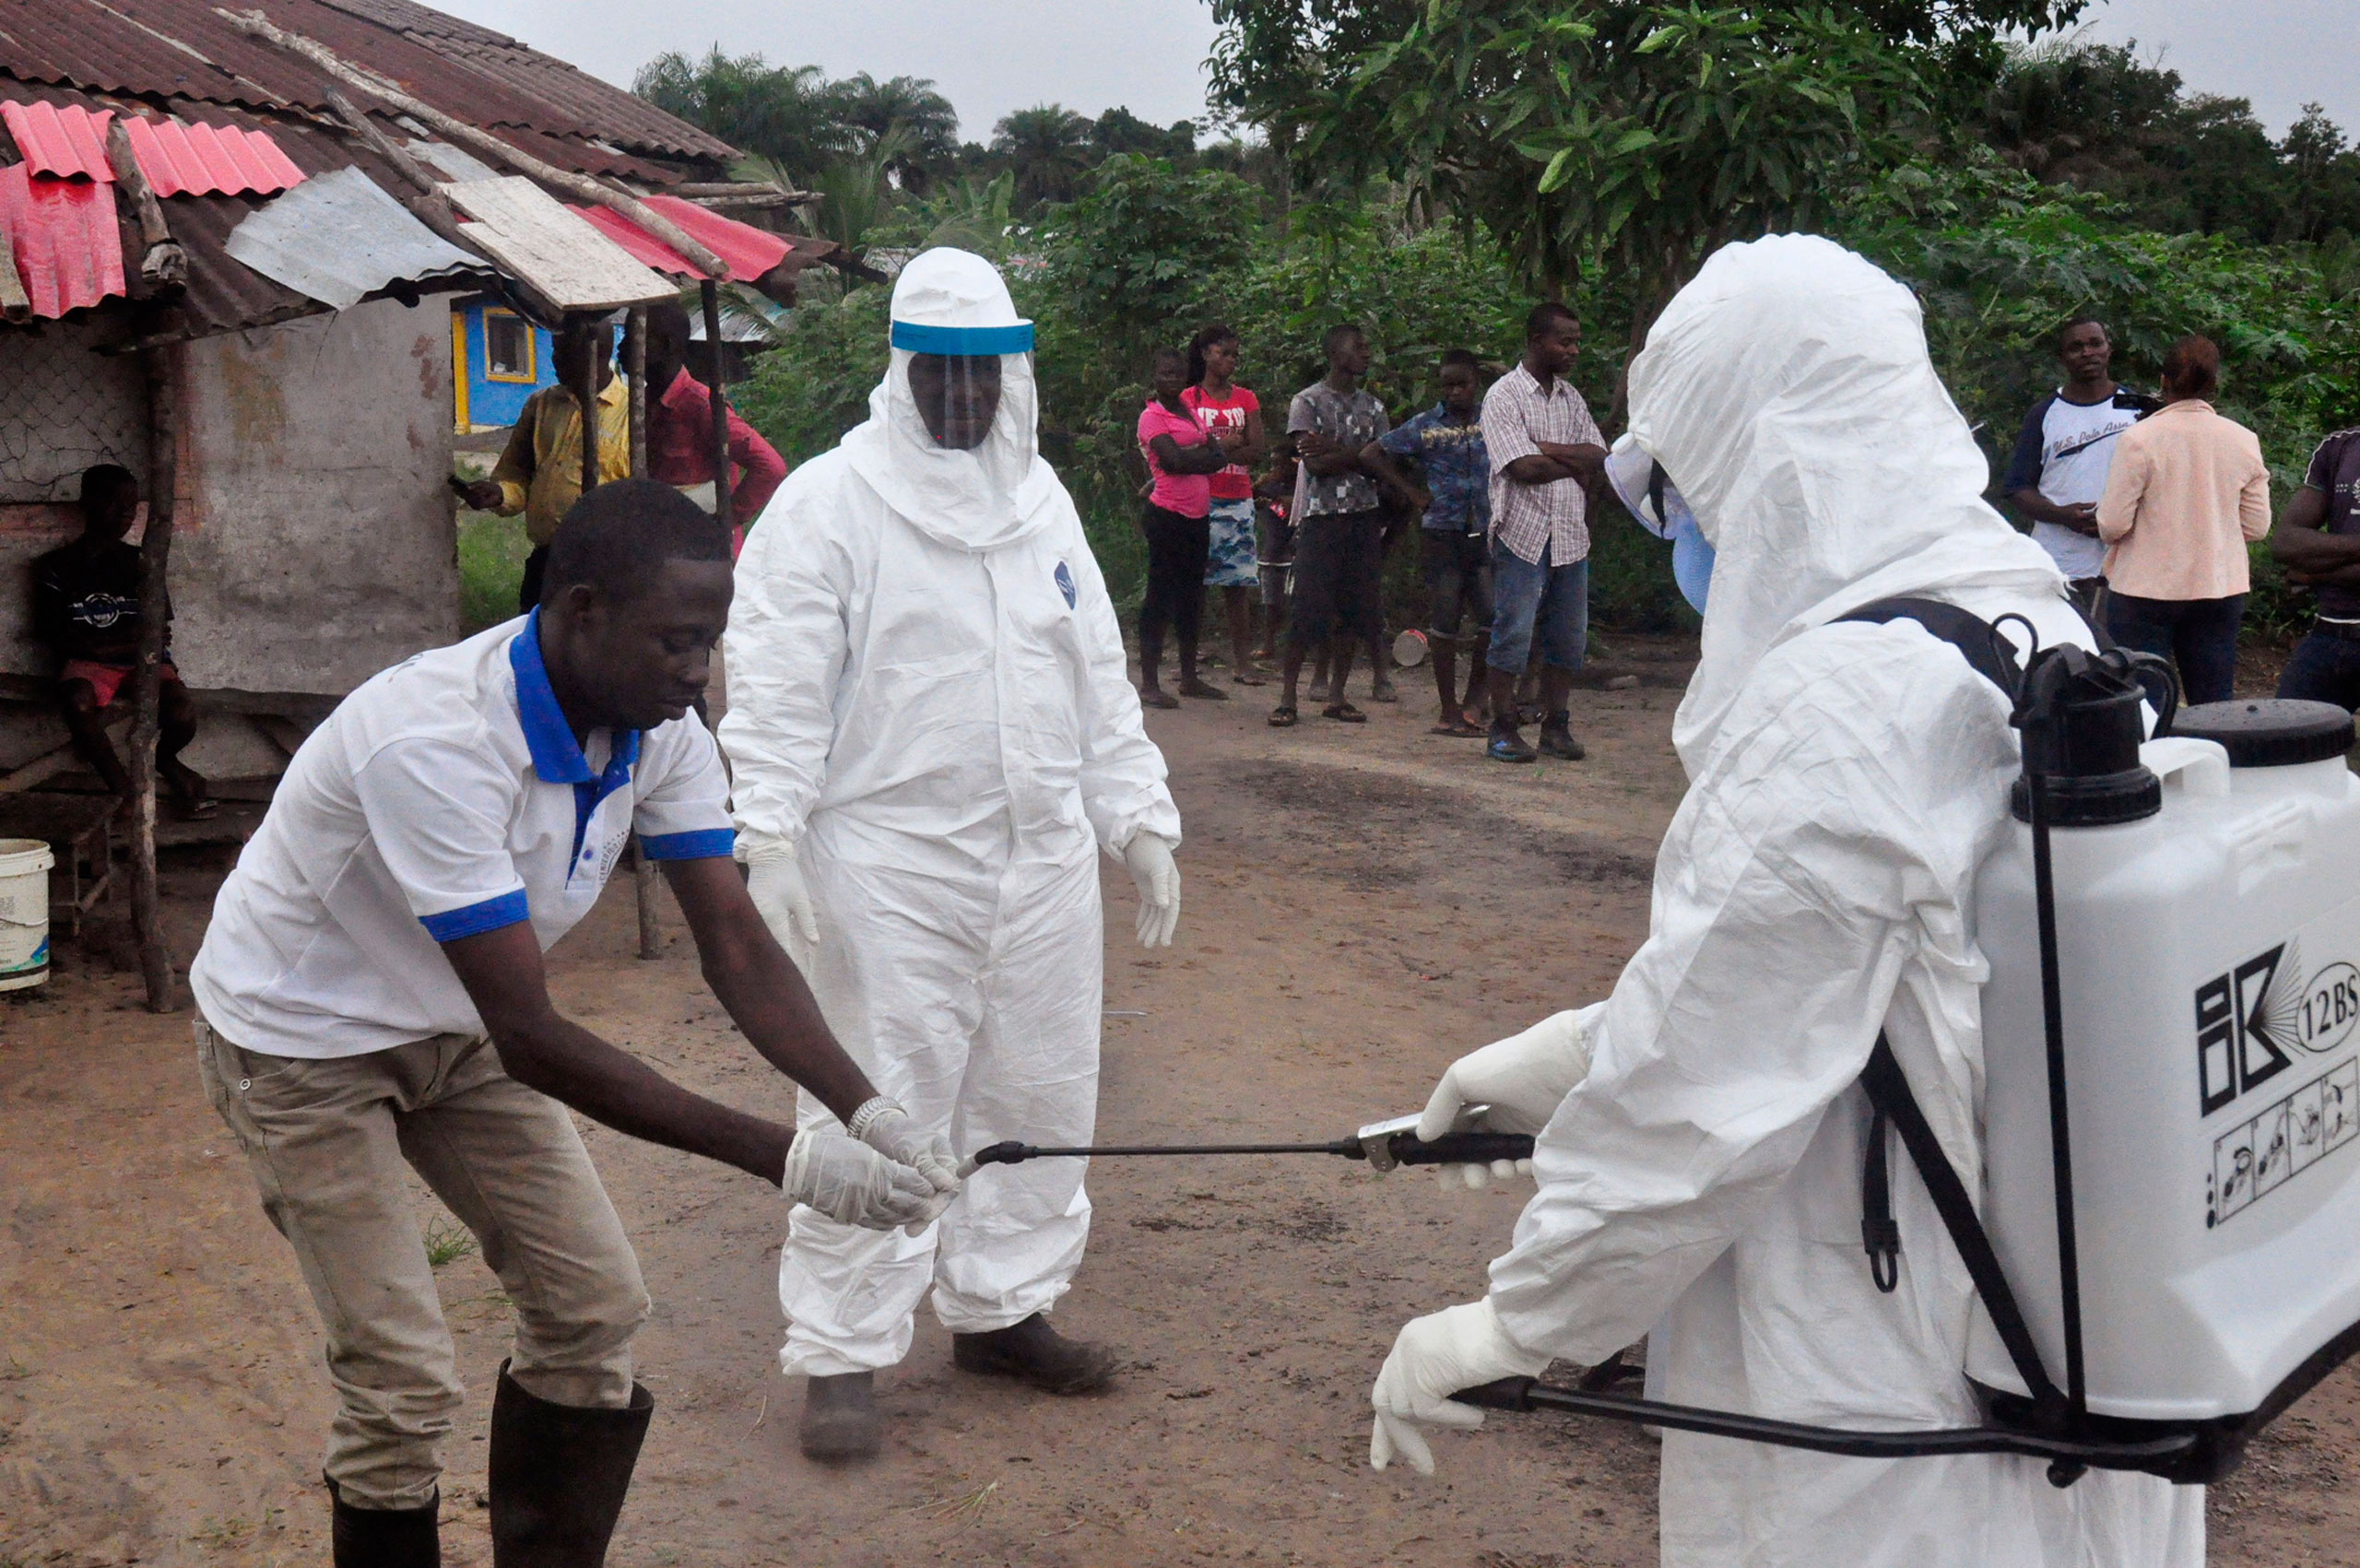 Ebola In America: What You Need To Know